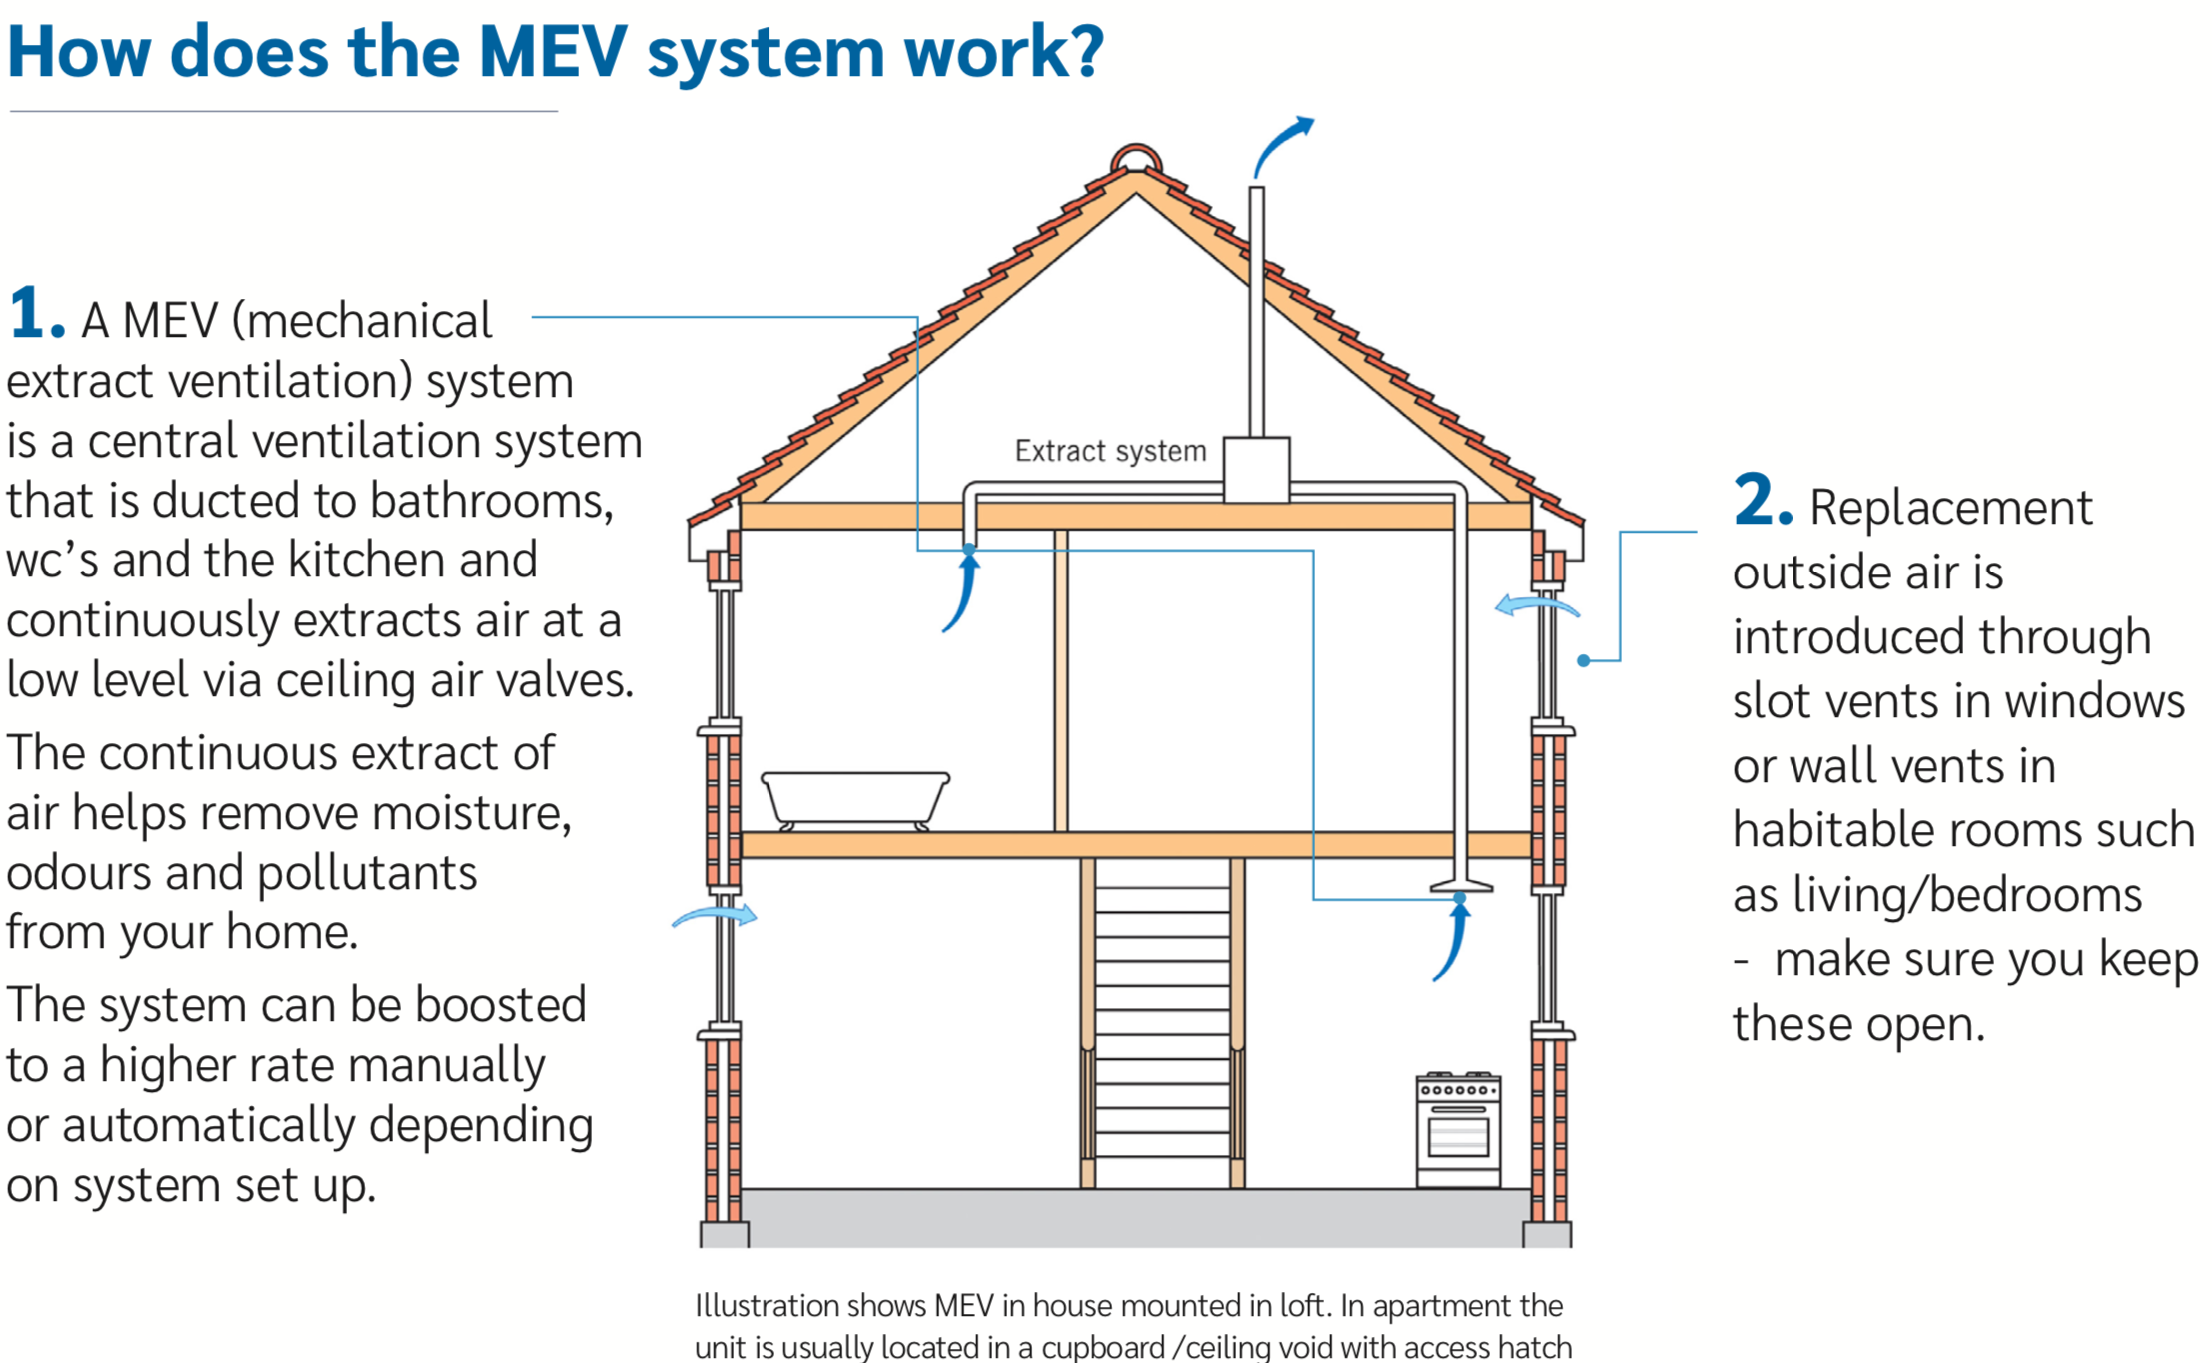 How does MEV work